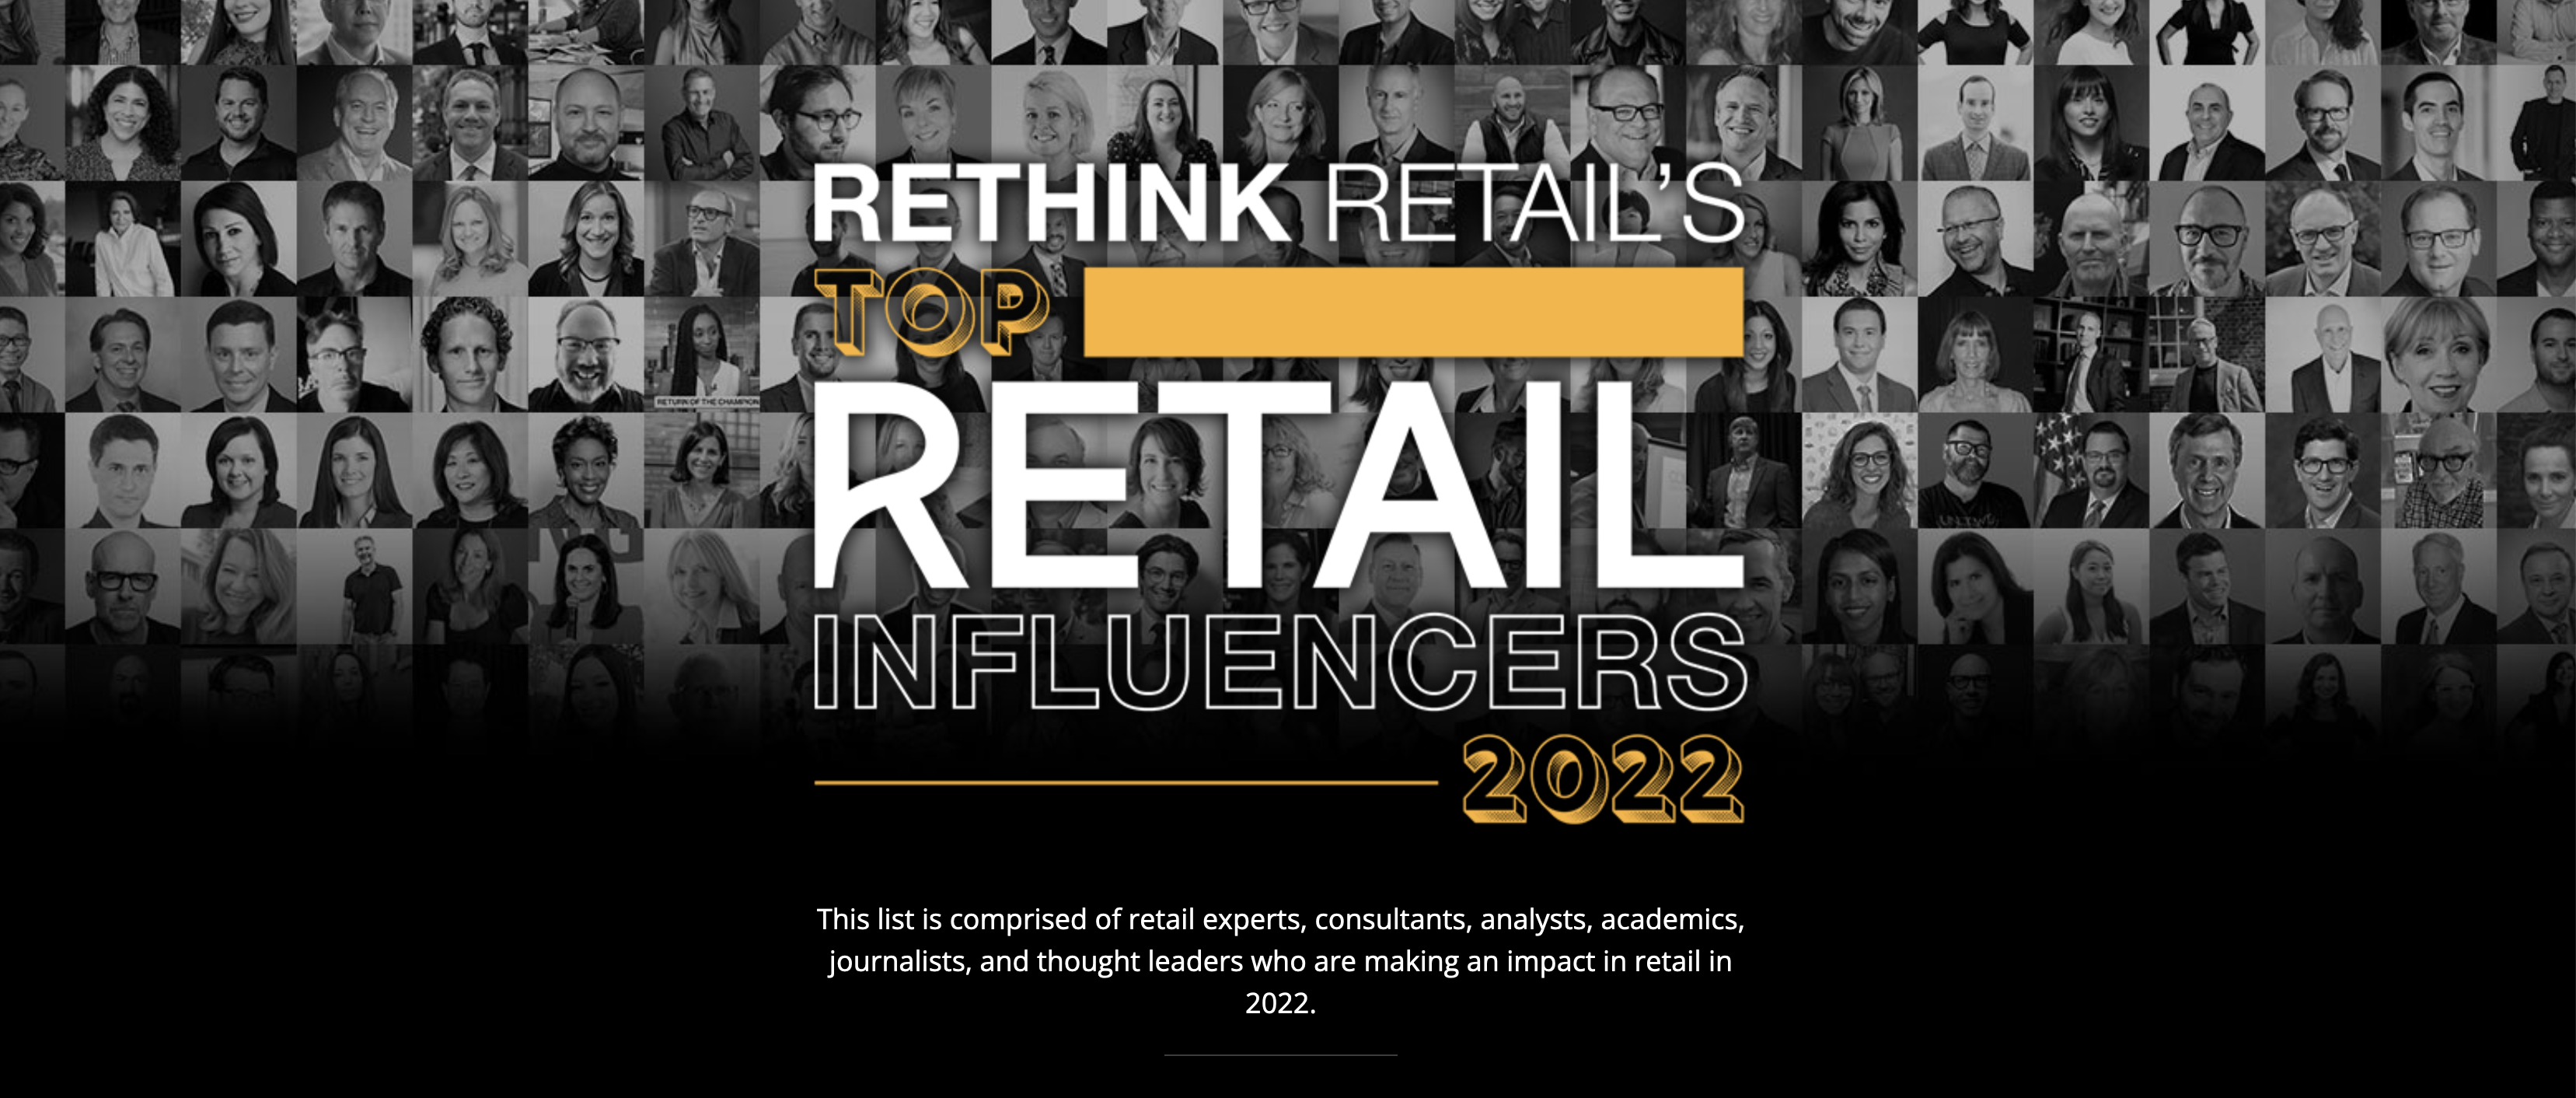 Rethink Retail's Top Retail Influencers 2022